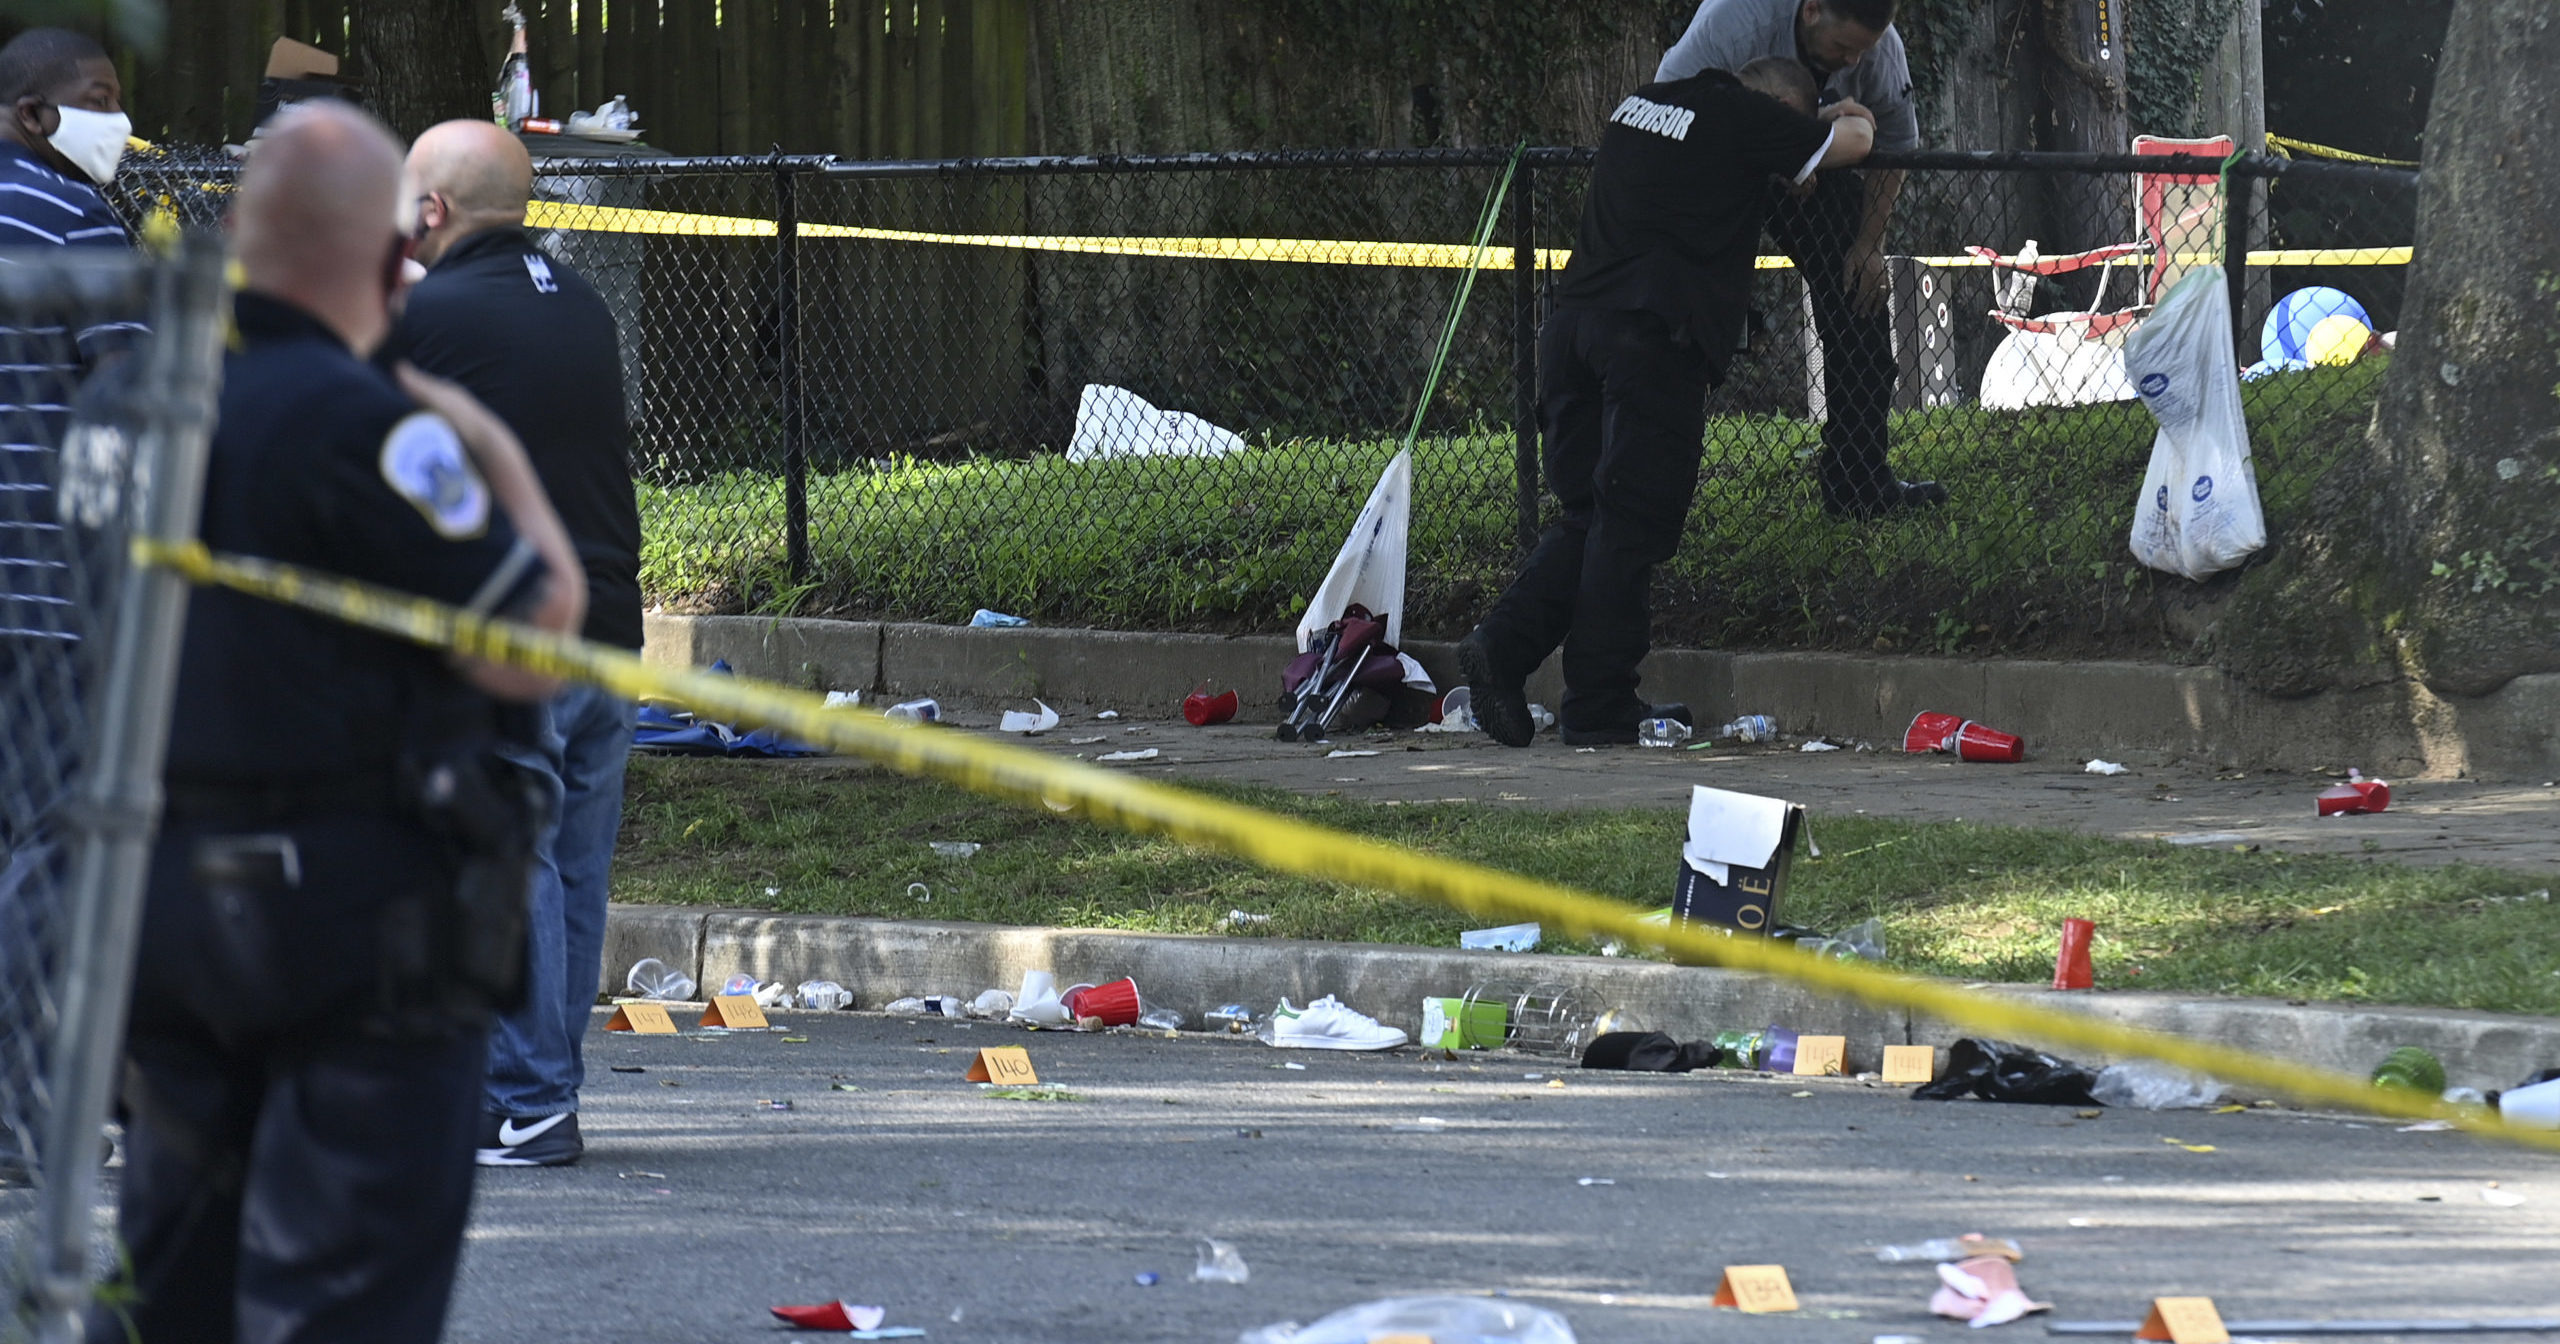 Authorities investigate the scene in Washington, D.C., after a shooting left one dead and 20 wounded on Aug. 9, 2020.